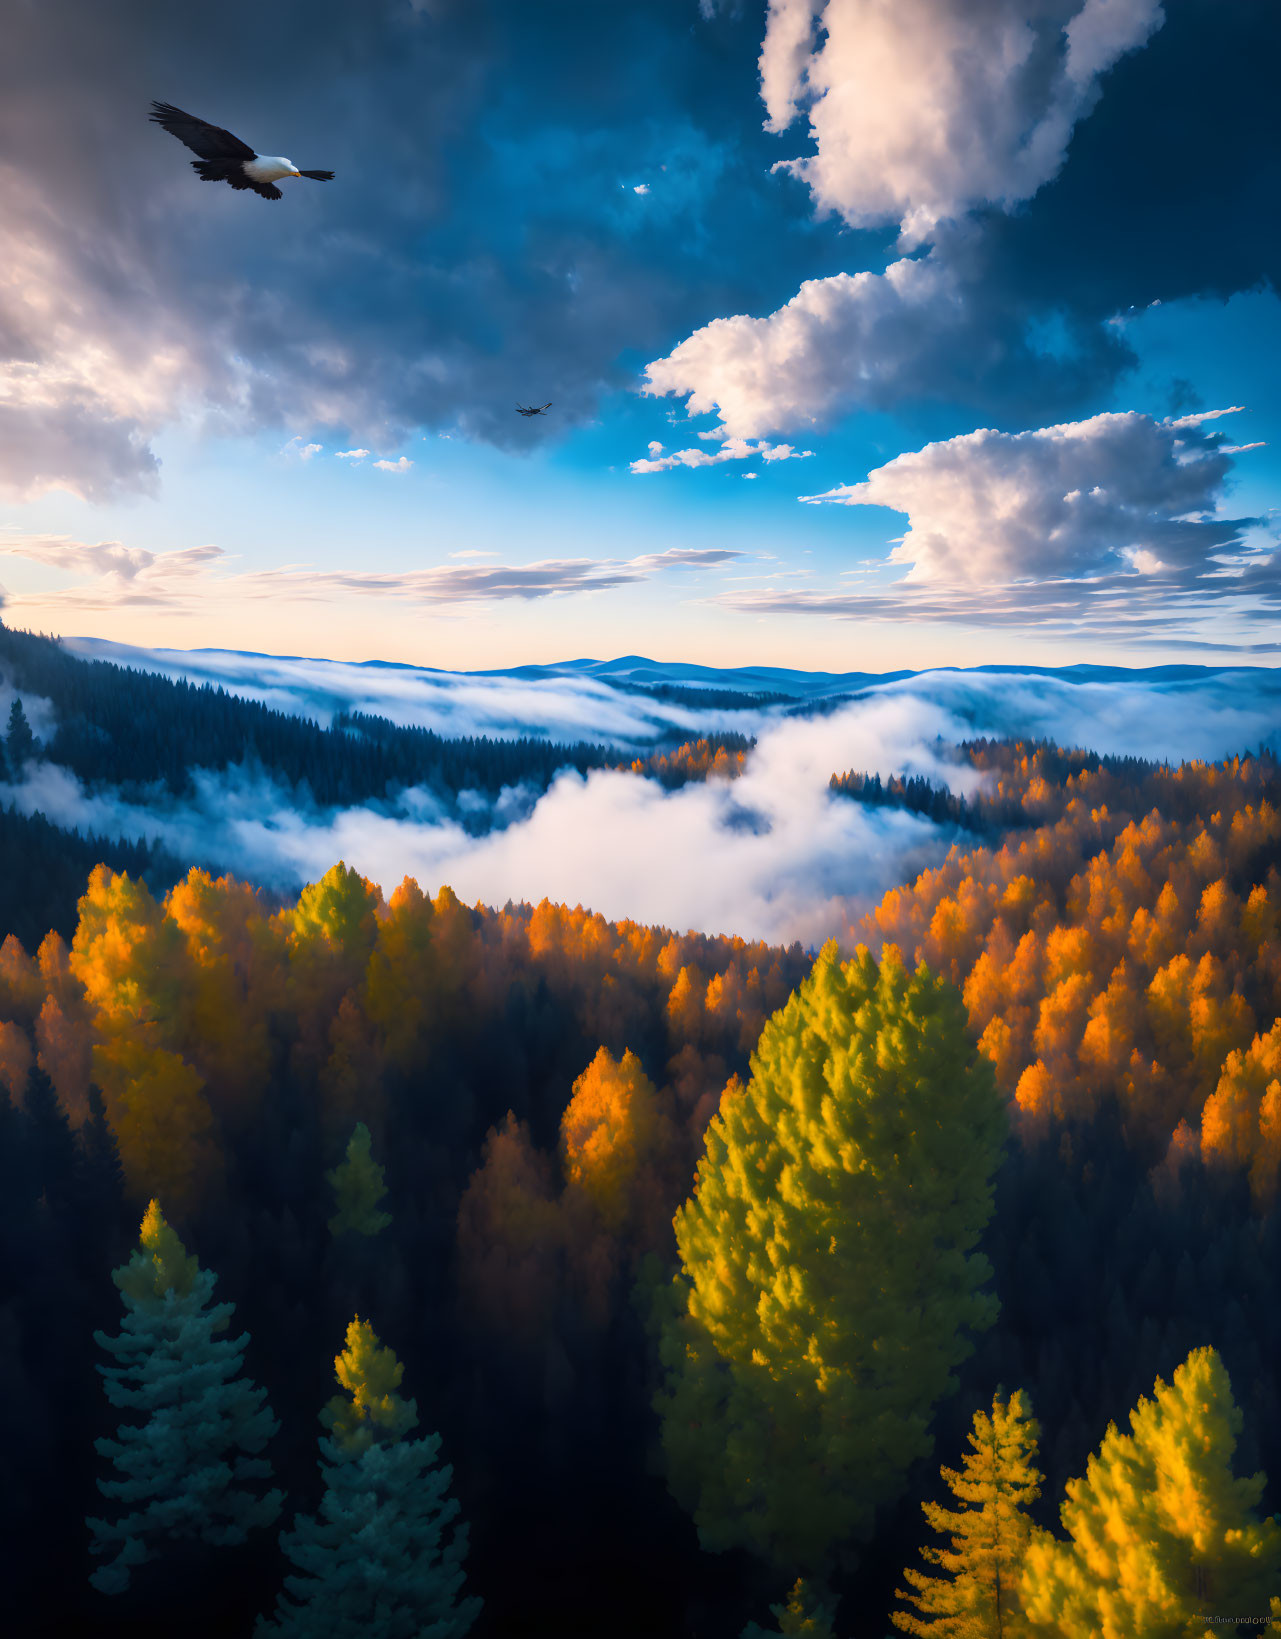 Misty forest at sunrise with autumn trees and bird in aerial view